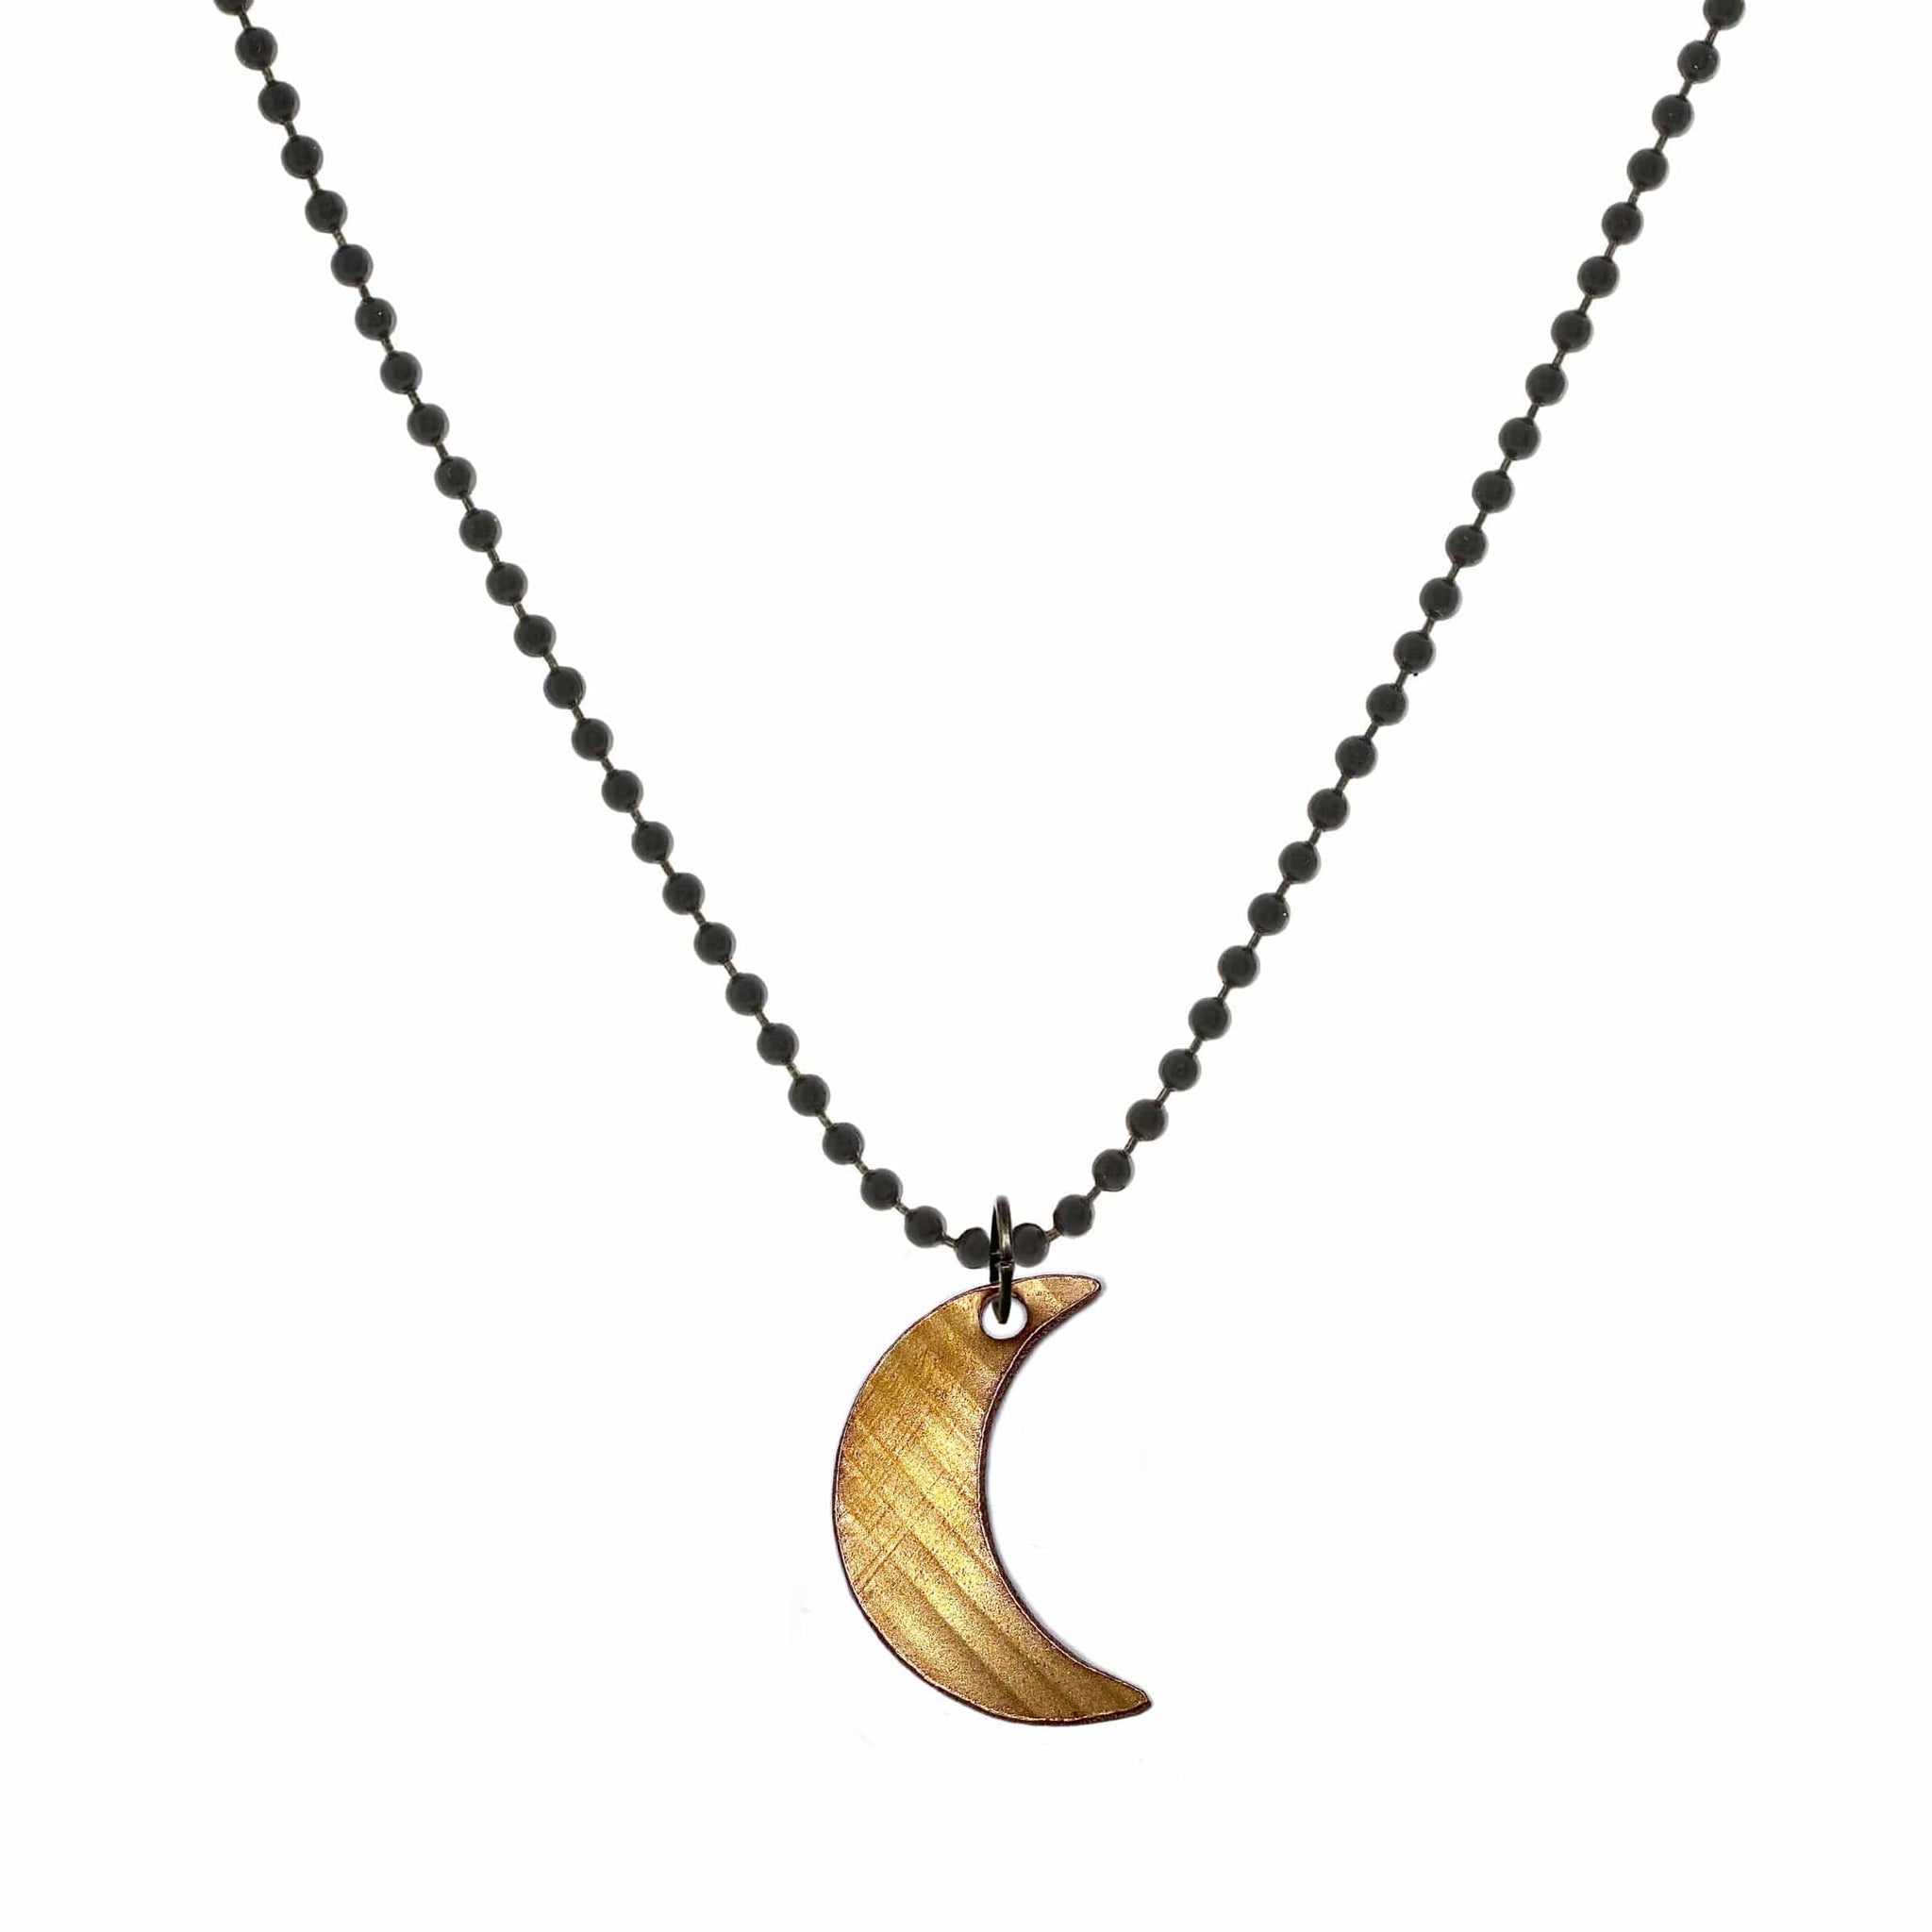 DRUM CYMBAL BALL & CHAIN NECKLACE - MOON